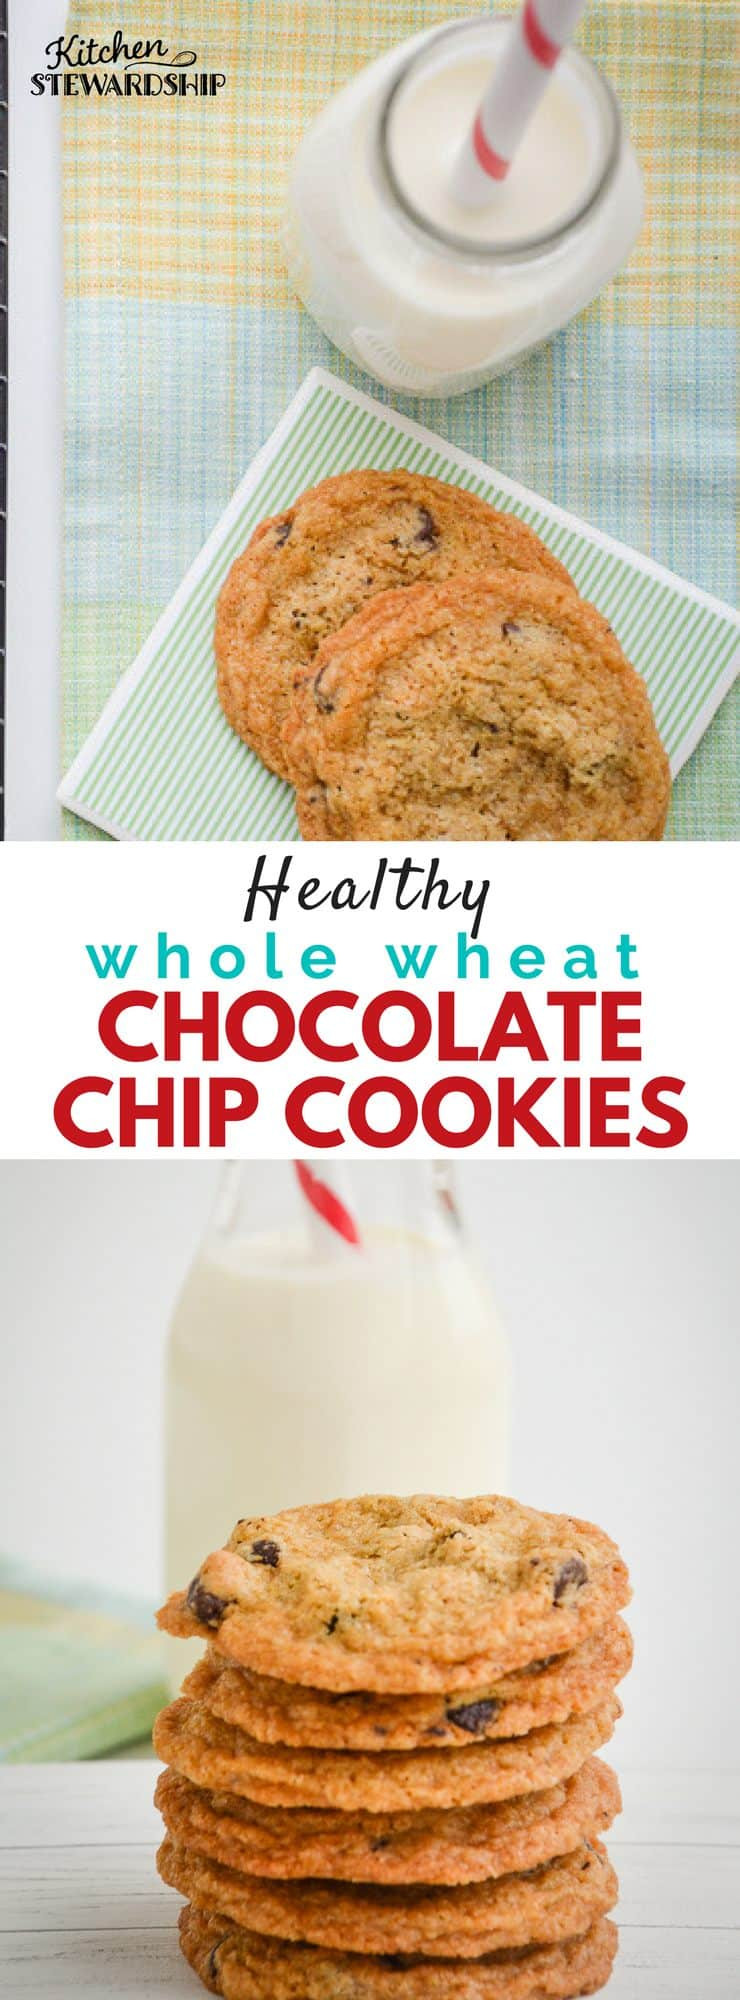 Healthy Whole Wheat Chocolate Chip Cookies
 Healthy Whole Wheat Chocolate Chip Cookie Recipe